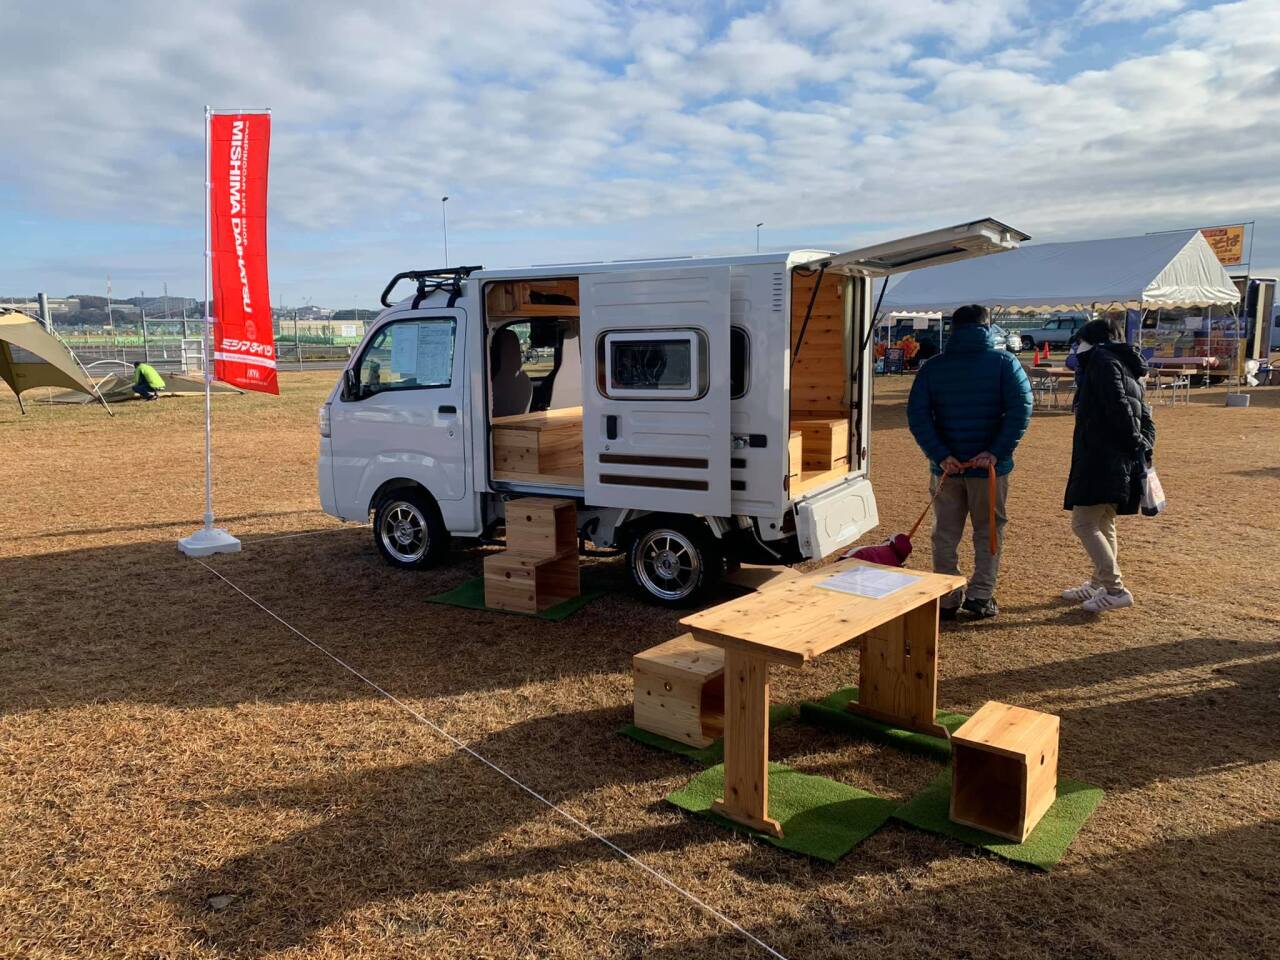 The Mishima Quokka micro-camper's table removes and works in the outdoors, along with two of the four wooden crates